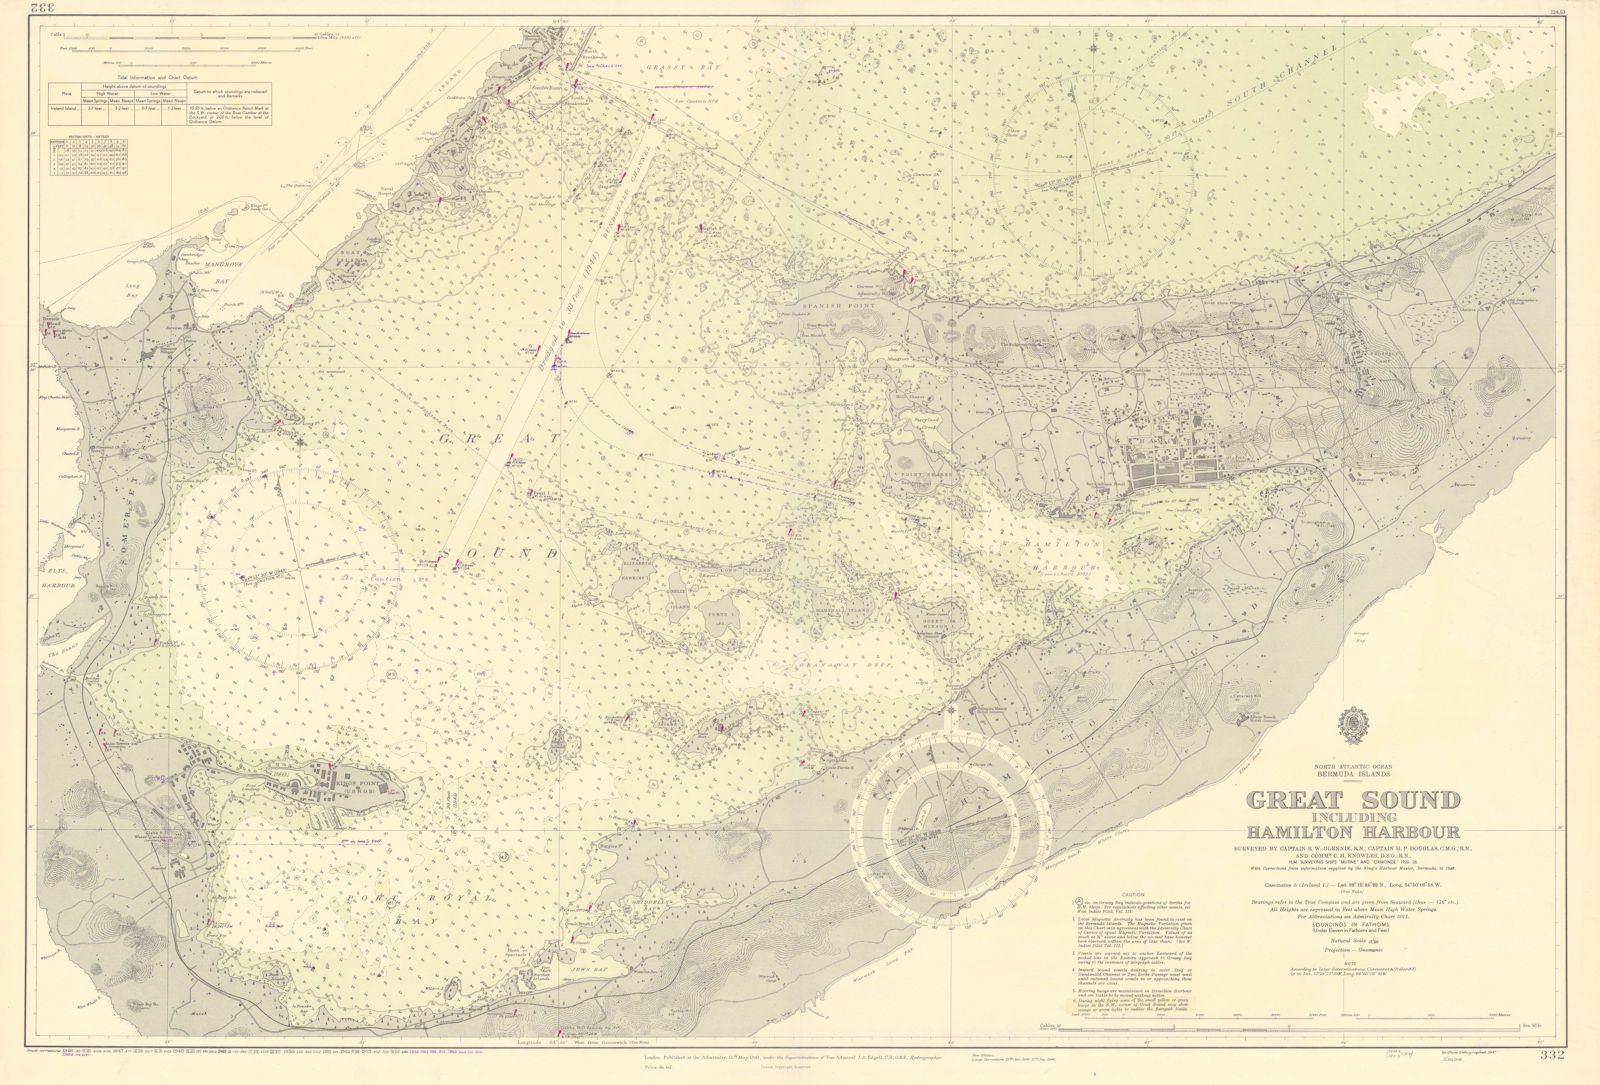 Associate Product Bermuda Great Sound. Hamilton Harbour ADMIRALTY sea chart 1941 (1956) old map